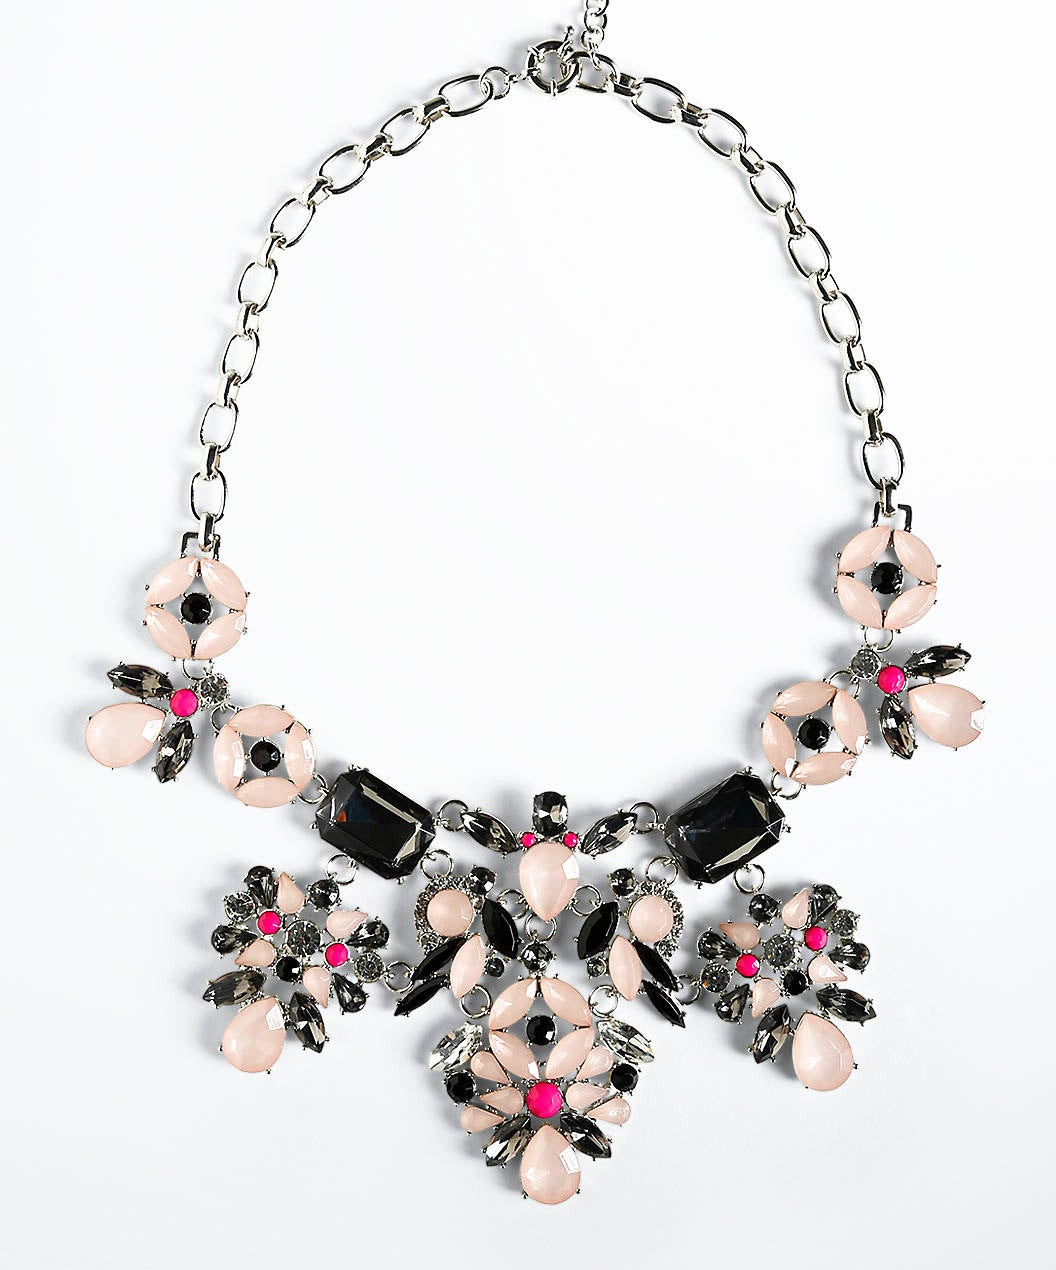 Flower Statement Necklace
 Flower Statement necklace light pink necklace bib by Cetro